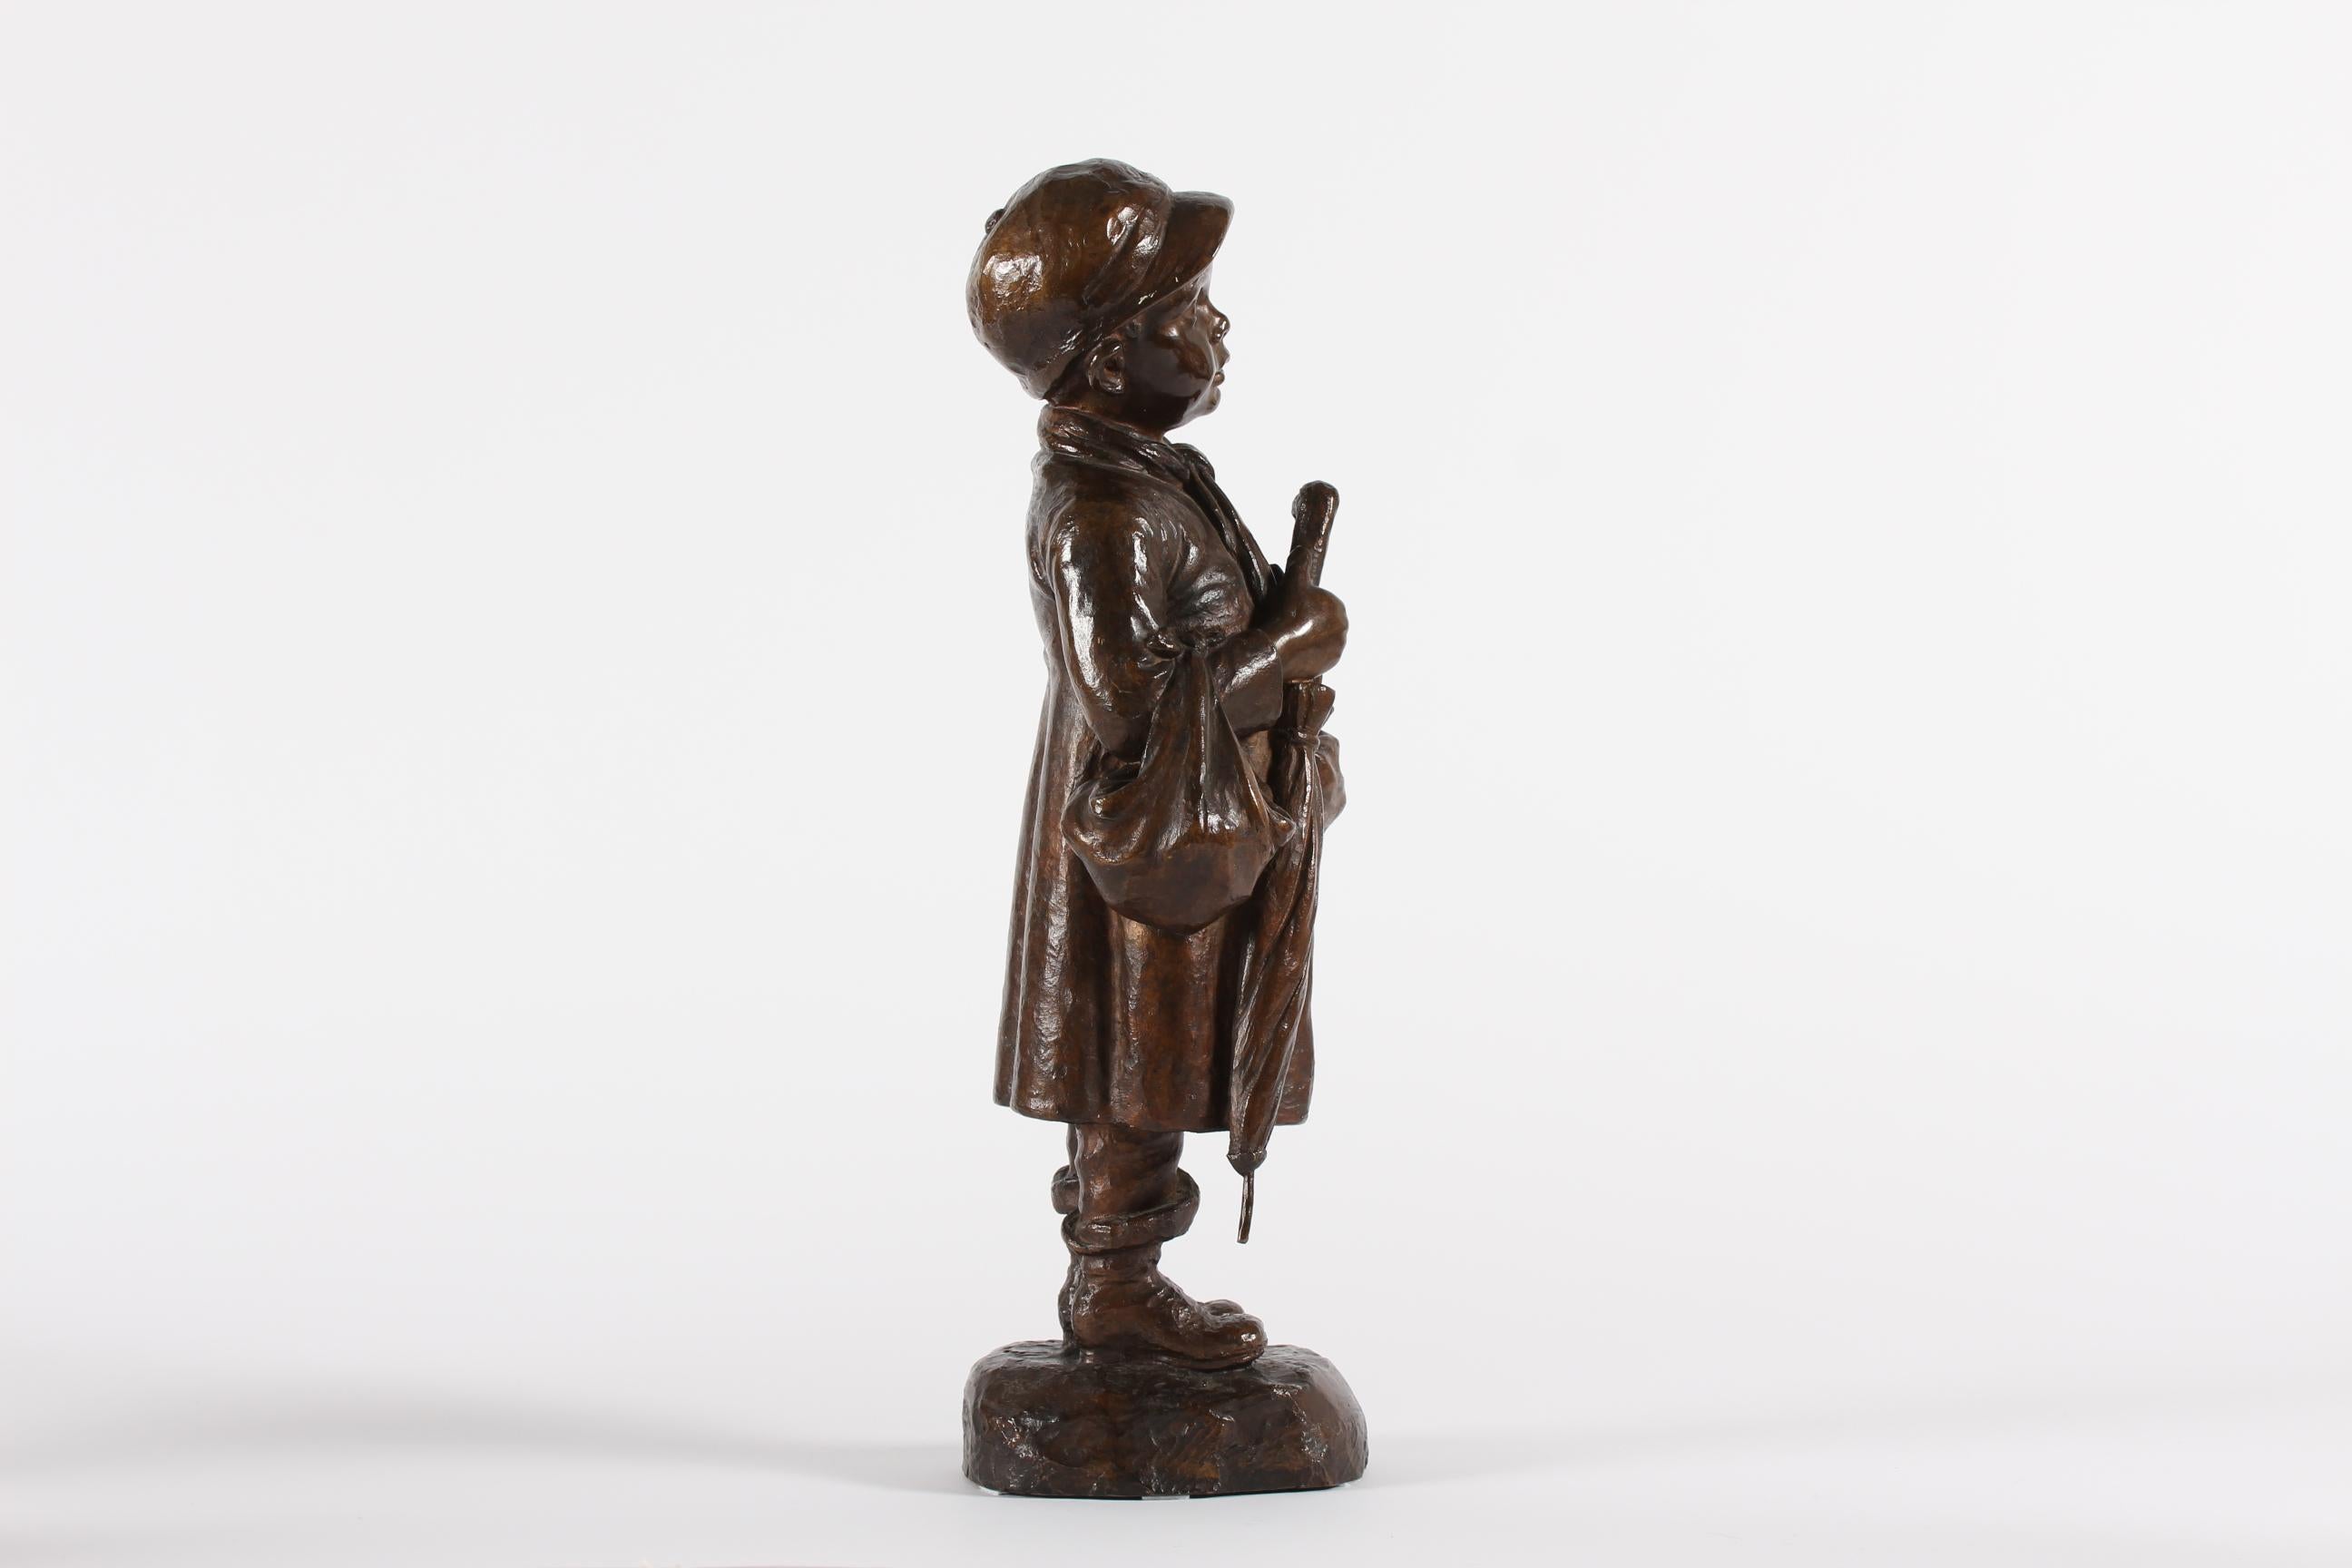 Danish Elna Borch Large Bronze Figurine of a Young Boy with Umbrella 1950s For Sale 1